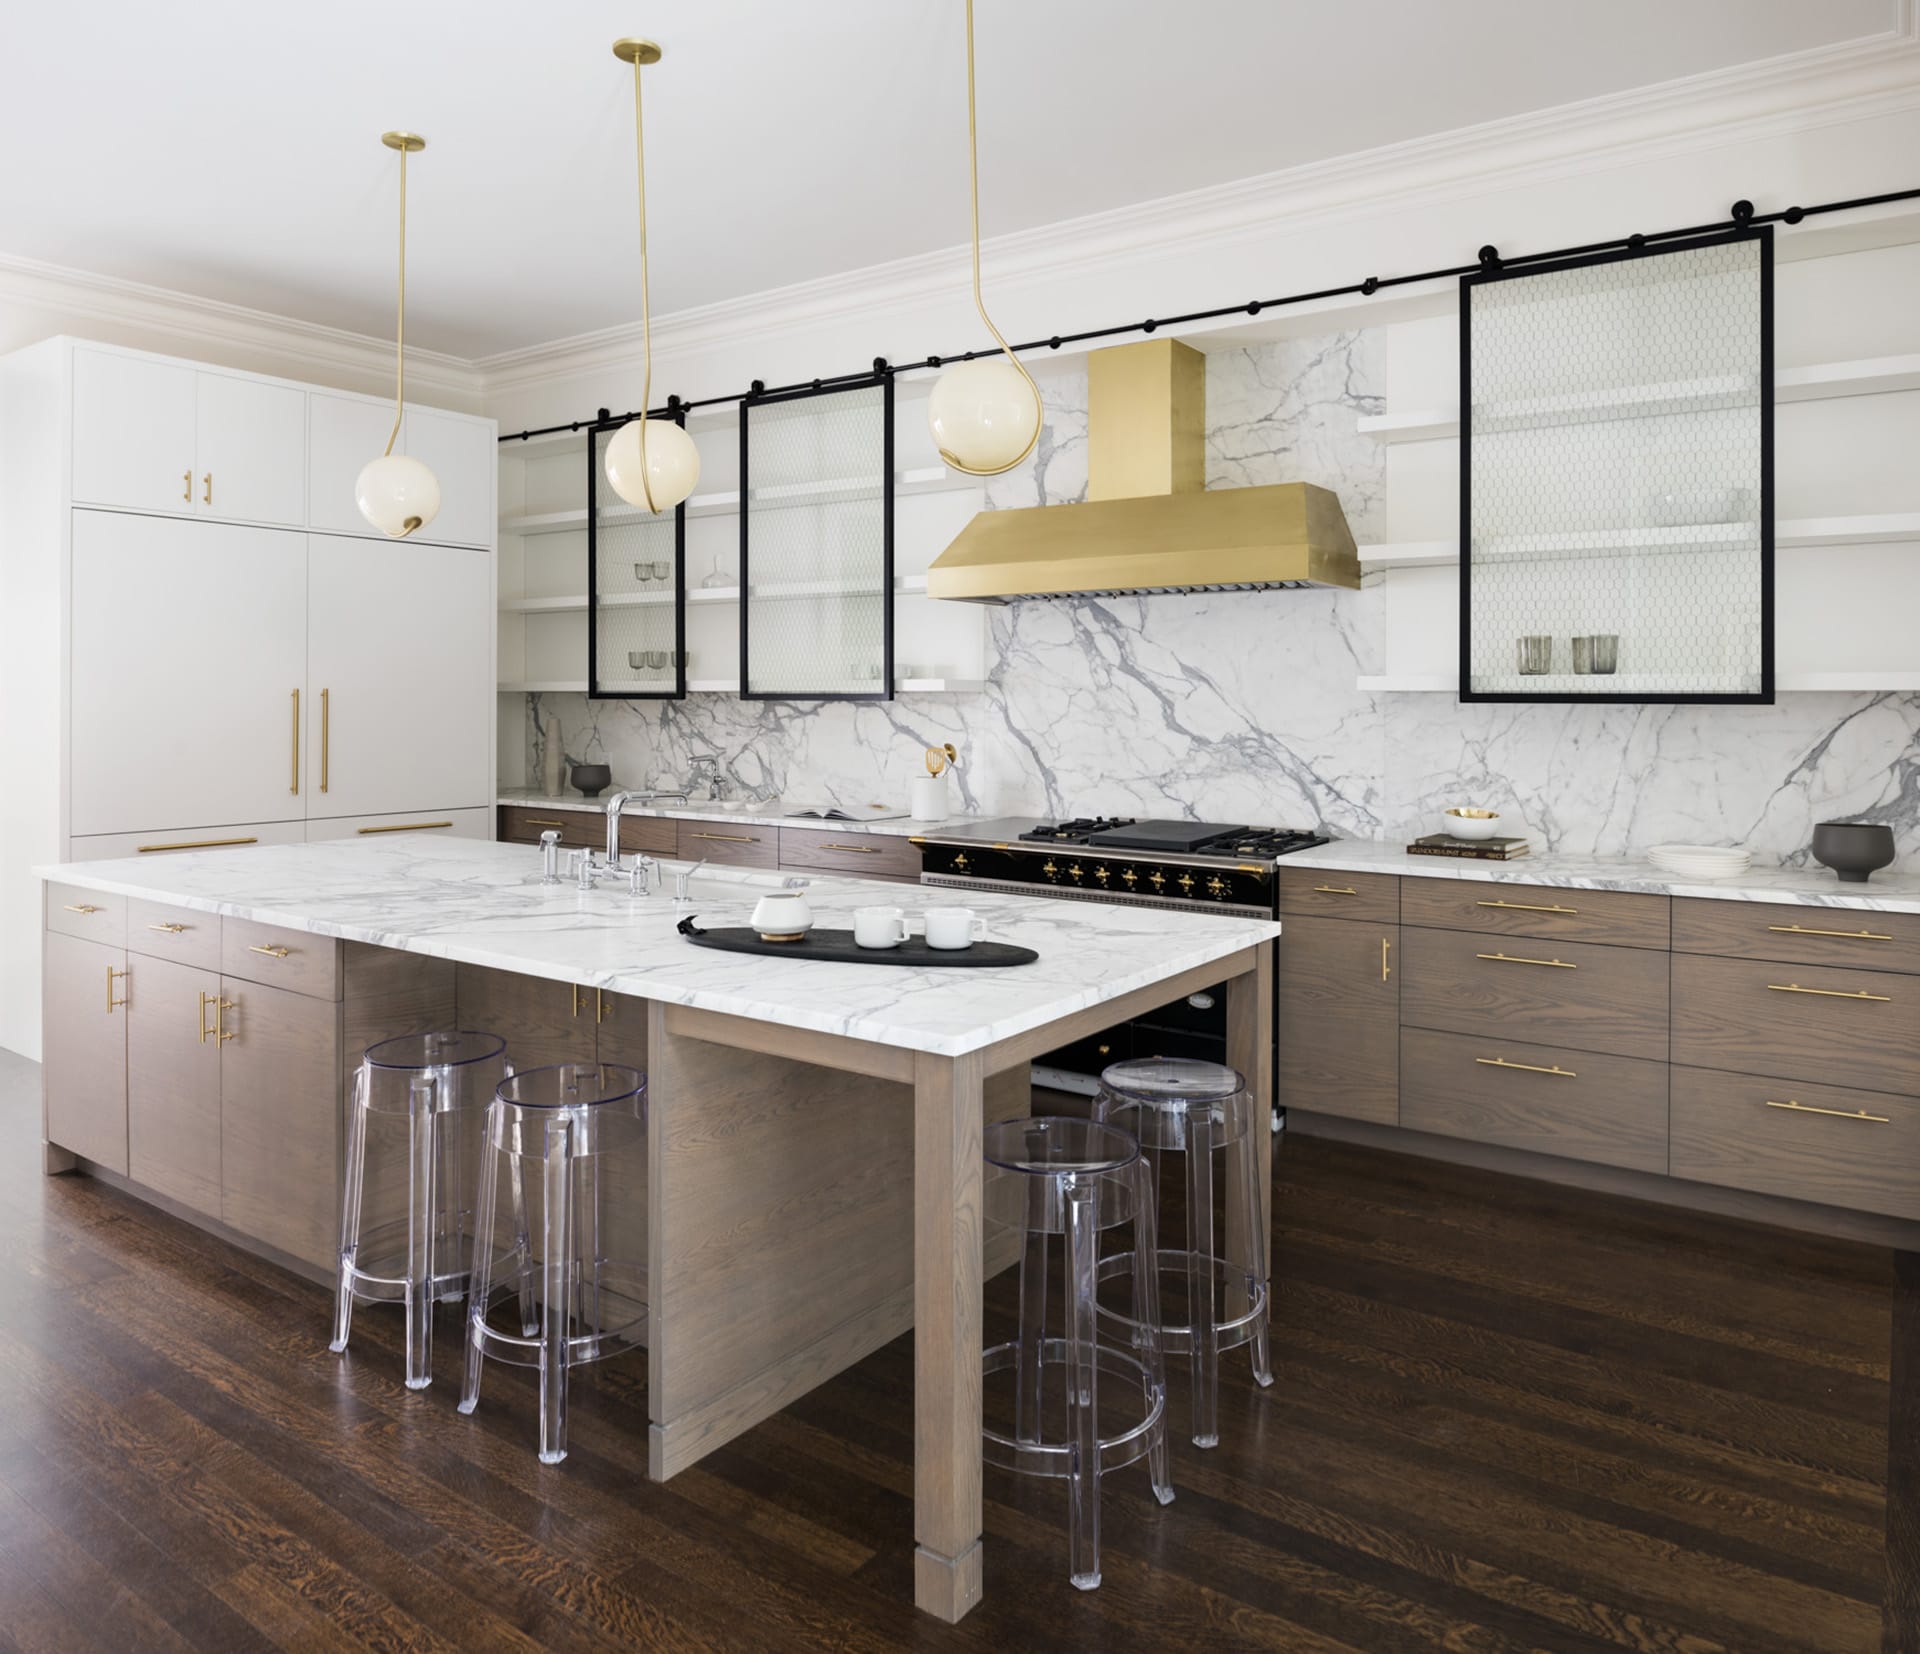 Kitchen with large marble backsplash and countertop, gold fixtures, and a custom farmhouse-style cabinetry system